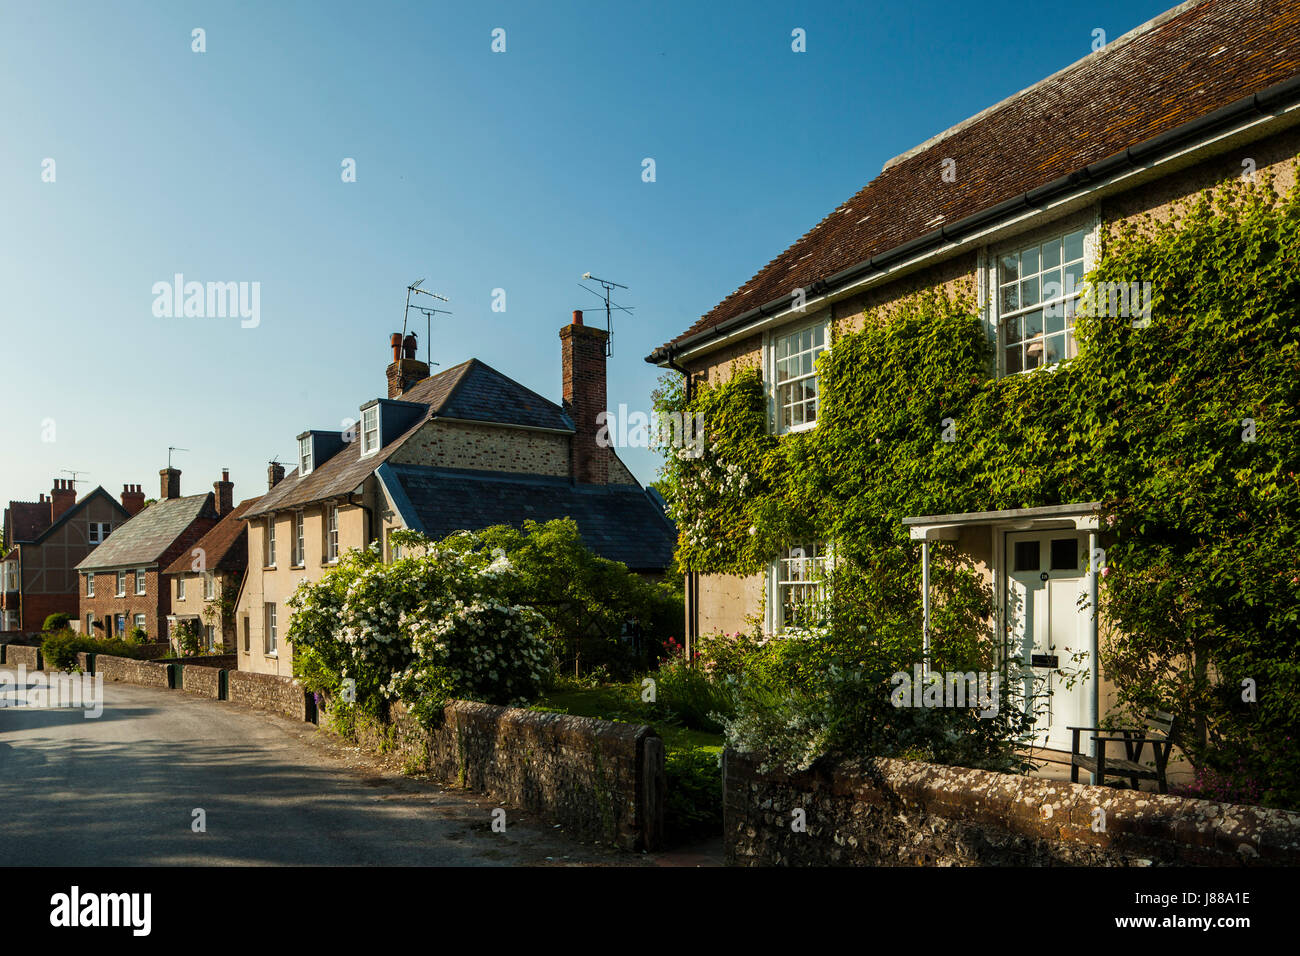 Spring afternoon in the South Downs village of Firle, East Sussex, England. Stock Photo